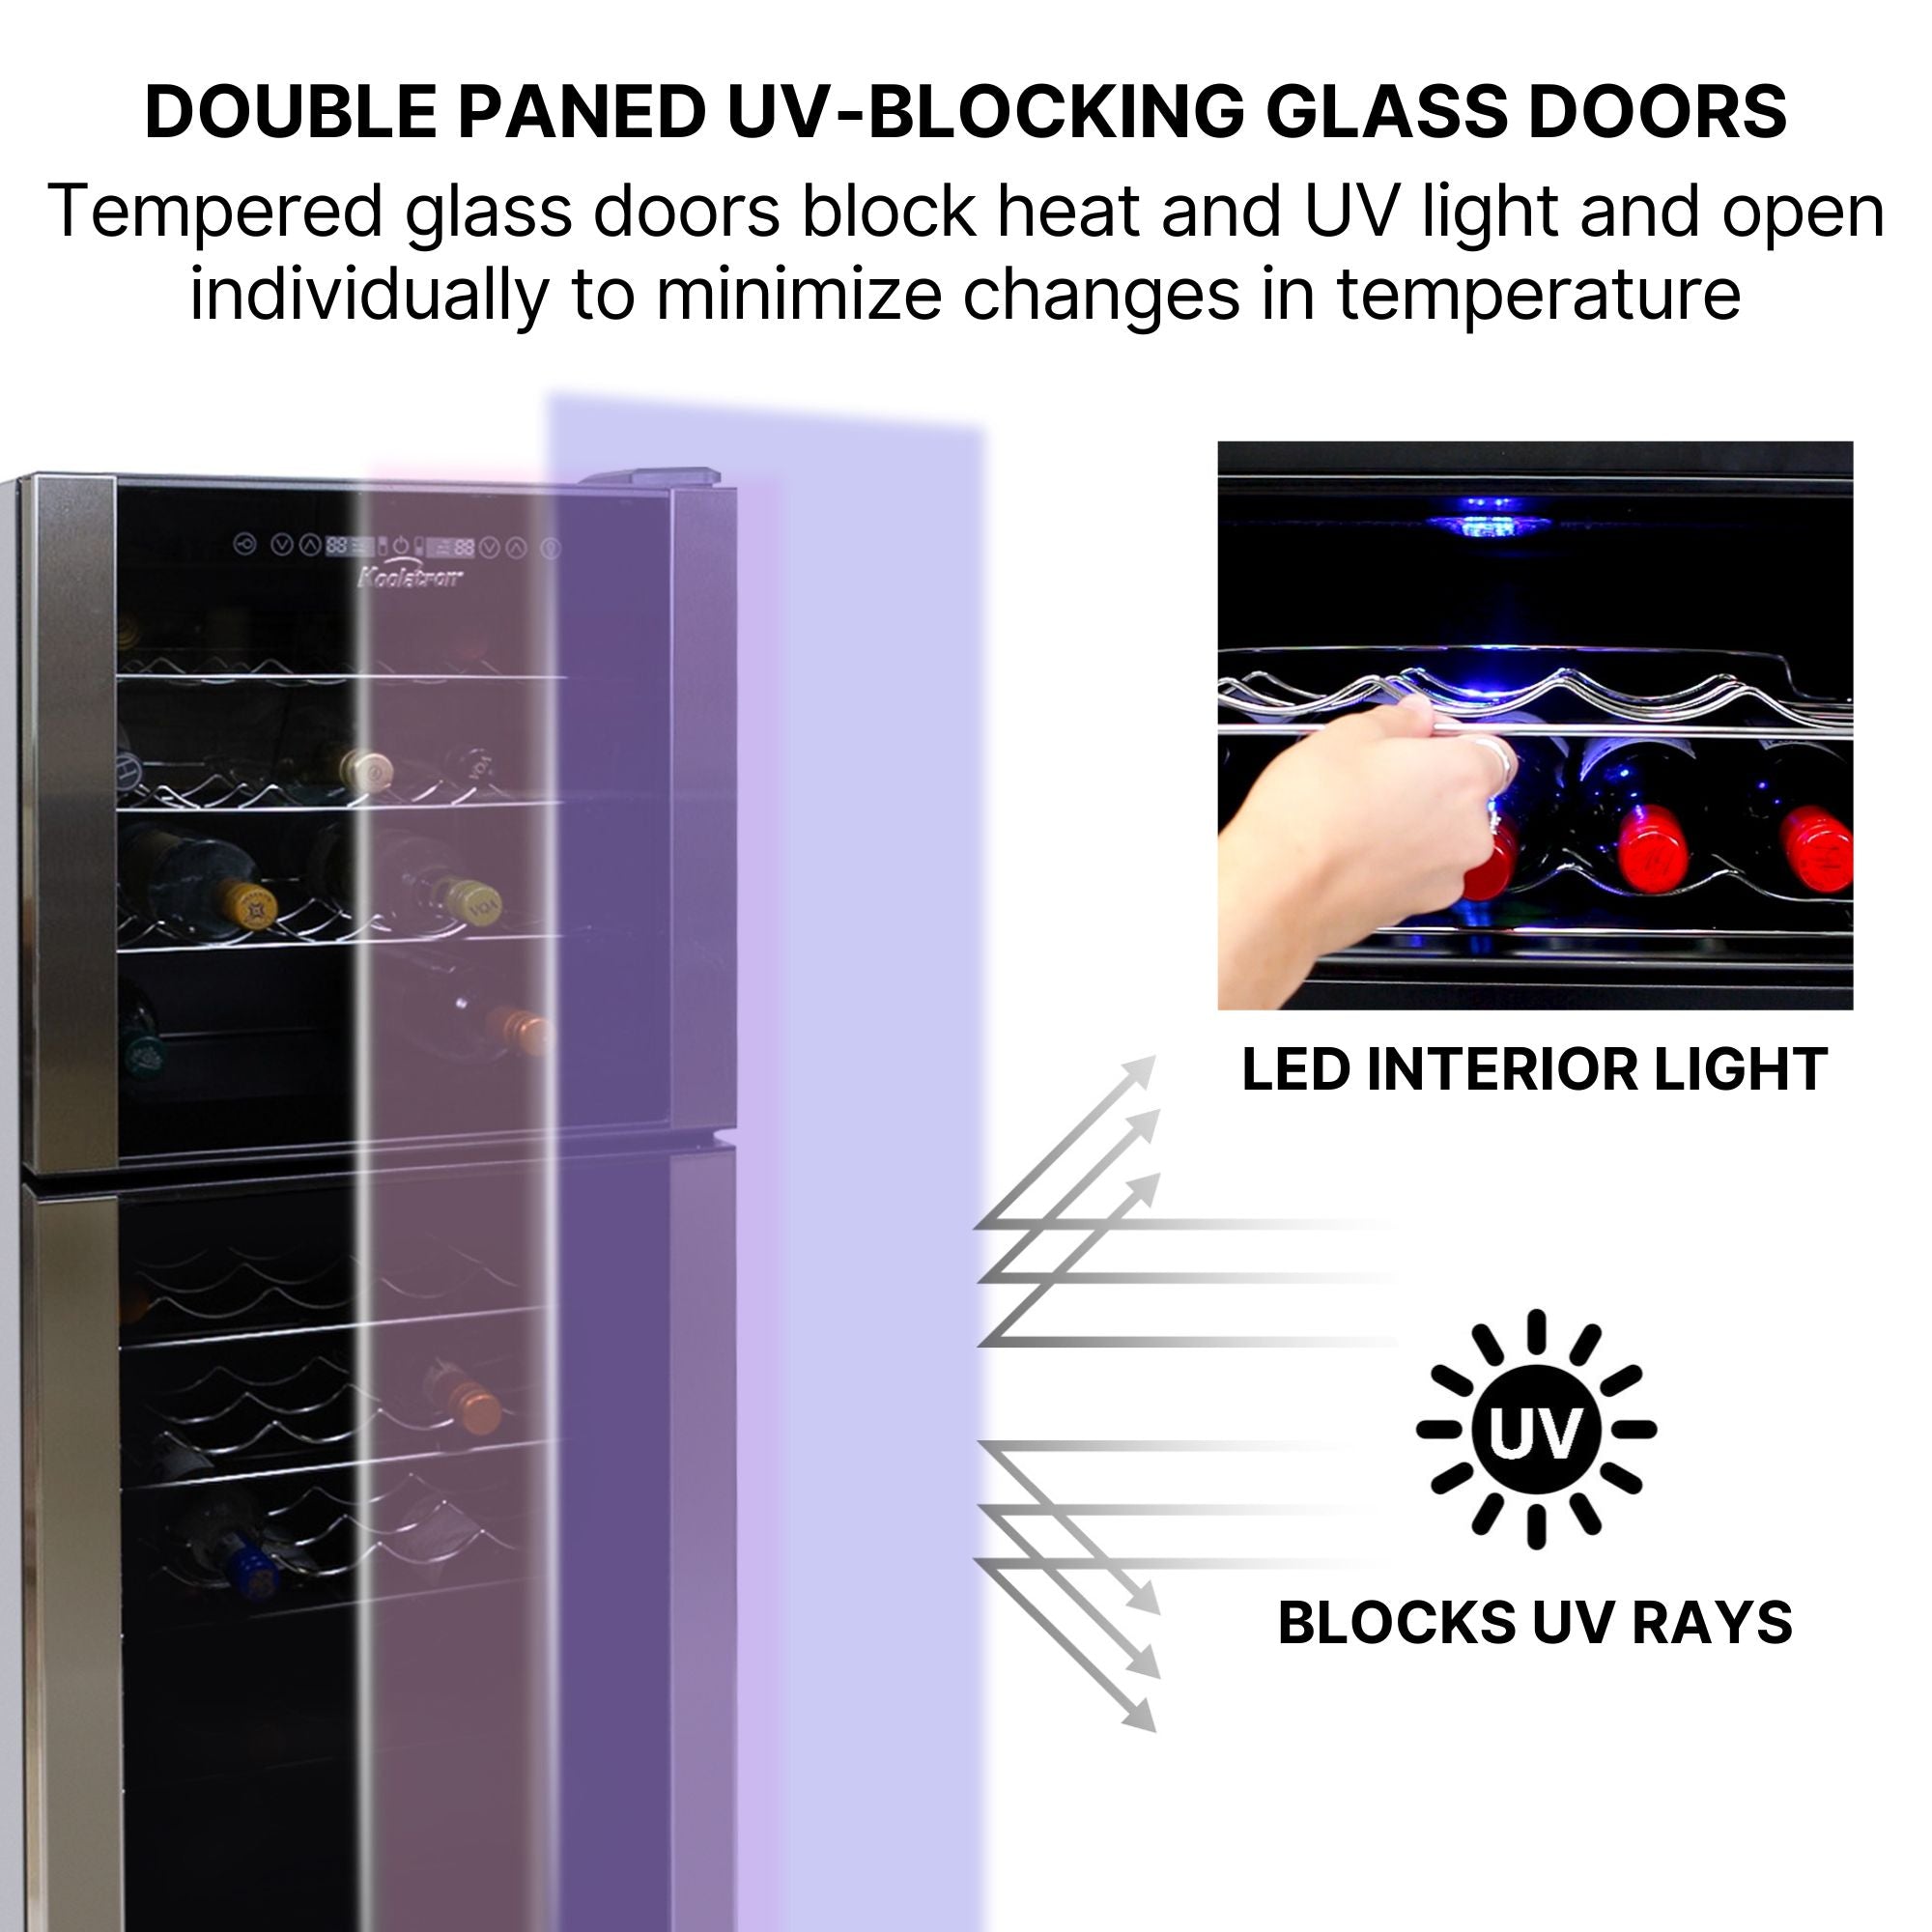 Closeup image of wine cooler, partly open, with text above reading "Double paned UV-blocking glass doors: Tempered glass doors block heat and UV light and open individually to minimize changes in temperature." To the right is an inset closeup of a hand pulling out one of the wire racks, captioned, "LED interior light," and a sun icon captioned, "blocks UV rays."